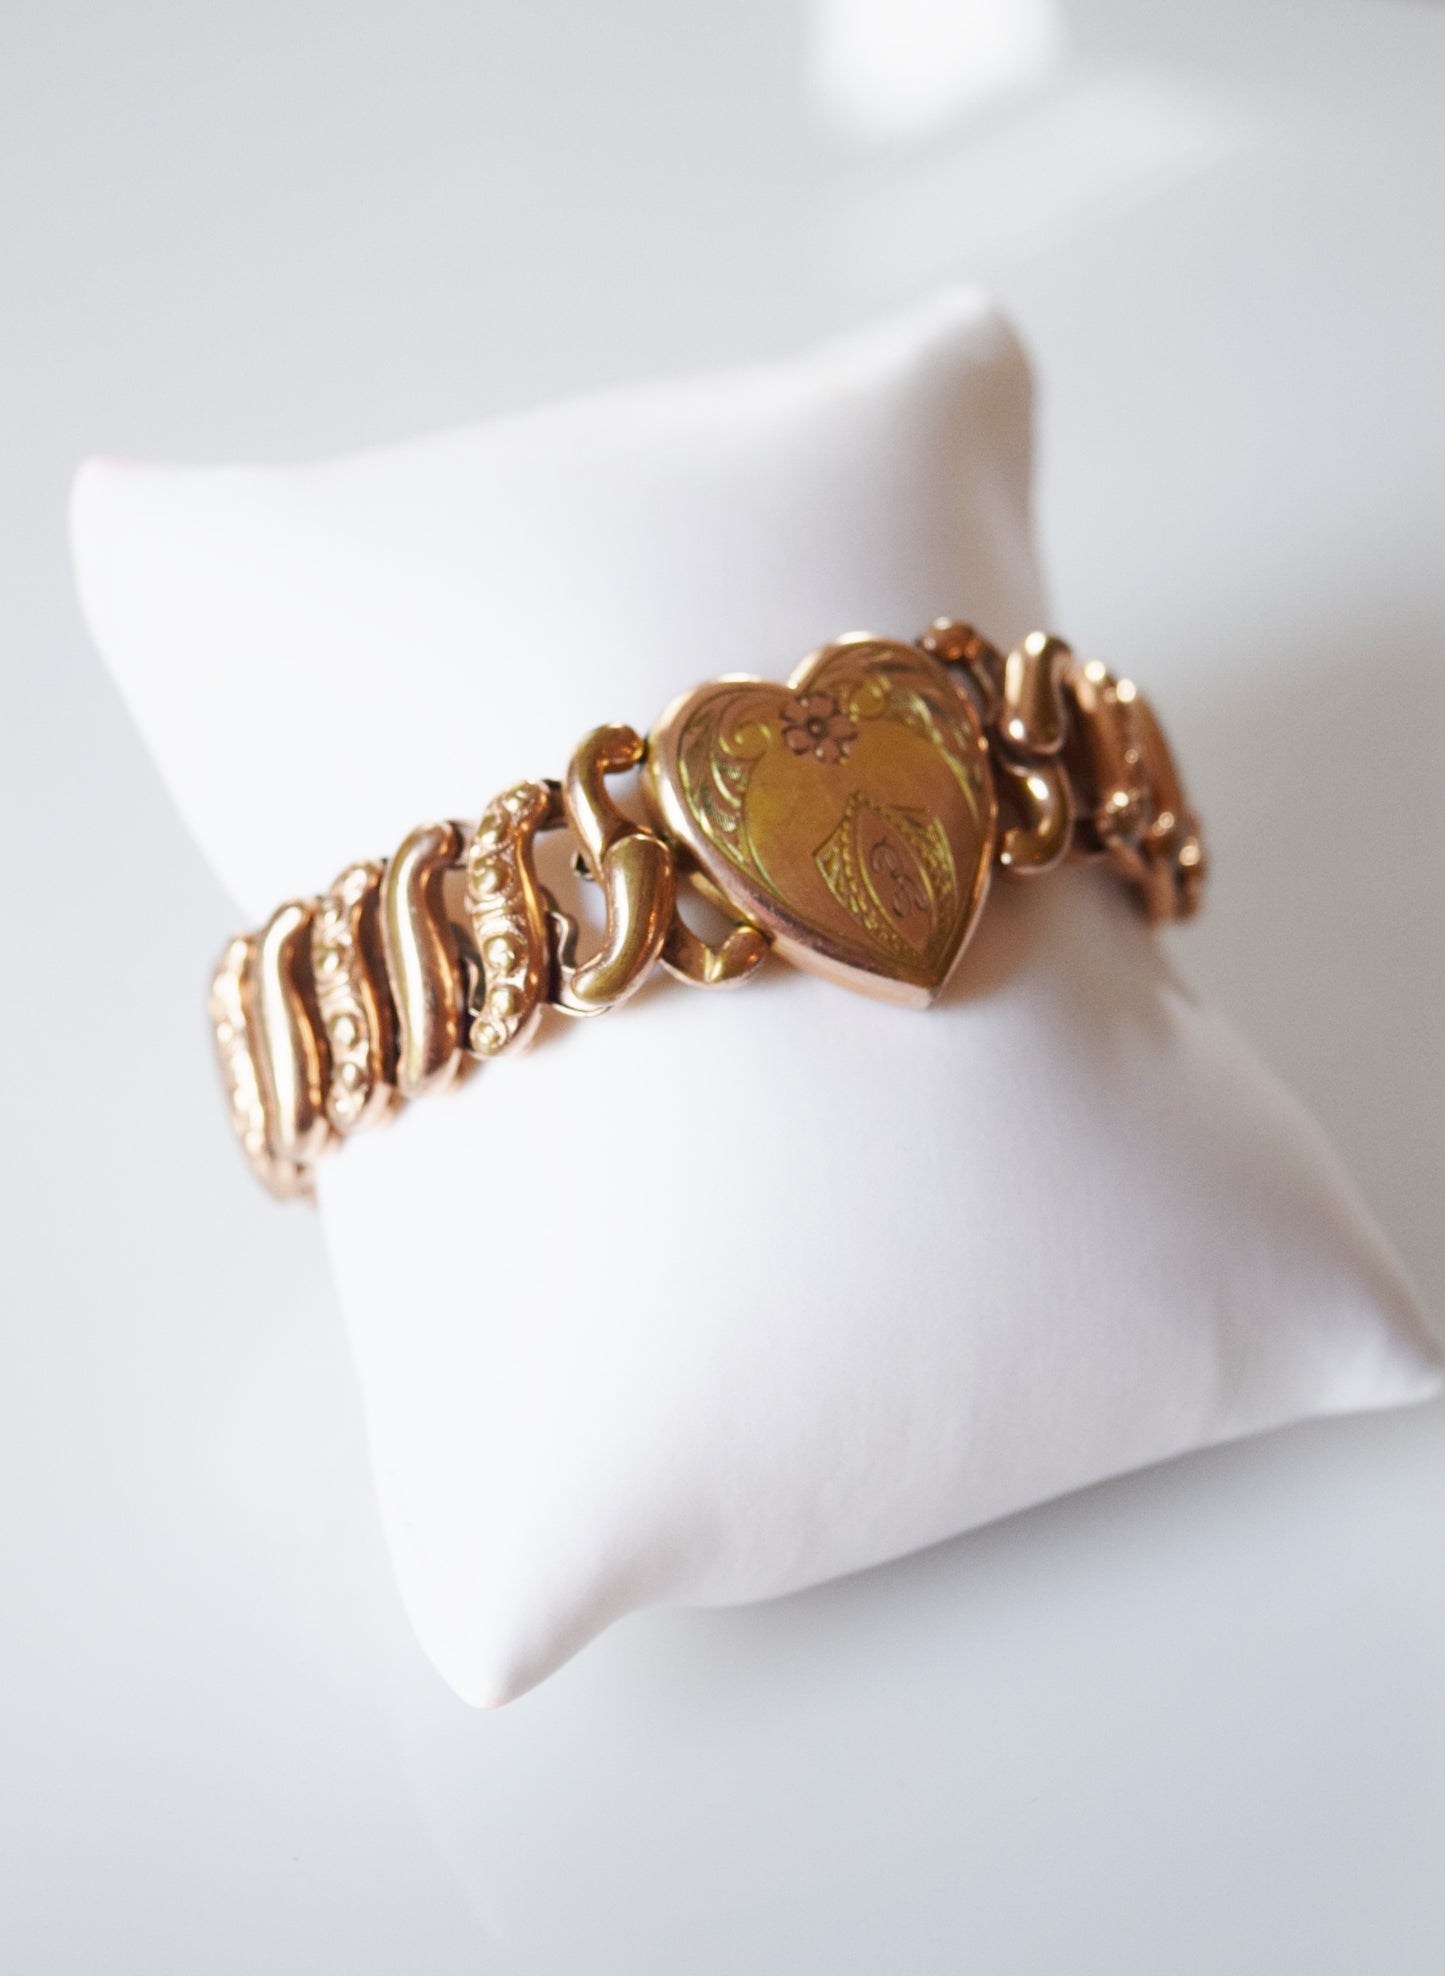 Antique Sweetheart Expansion Bracelet with Engraved Heart Charm | "B"